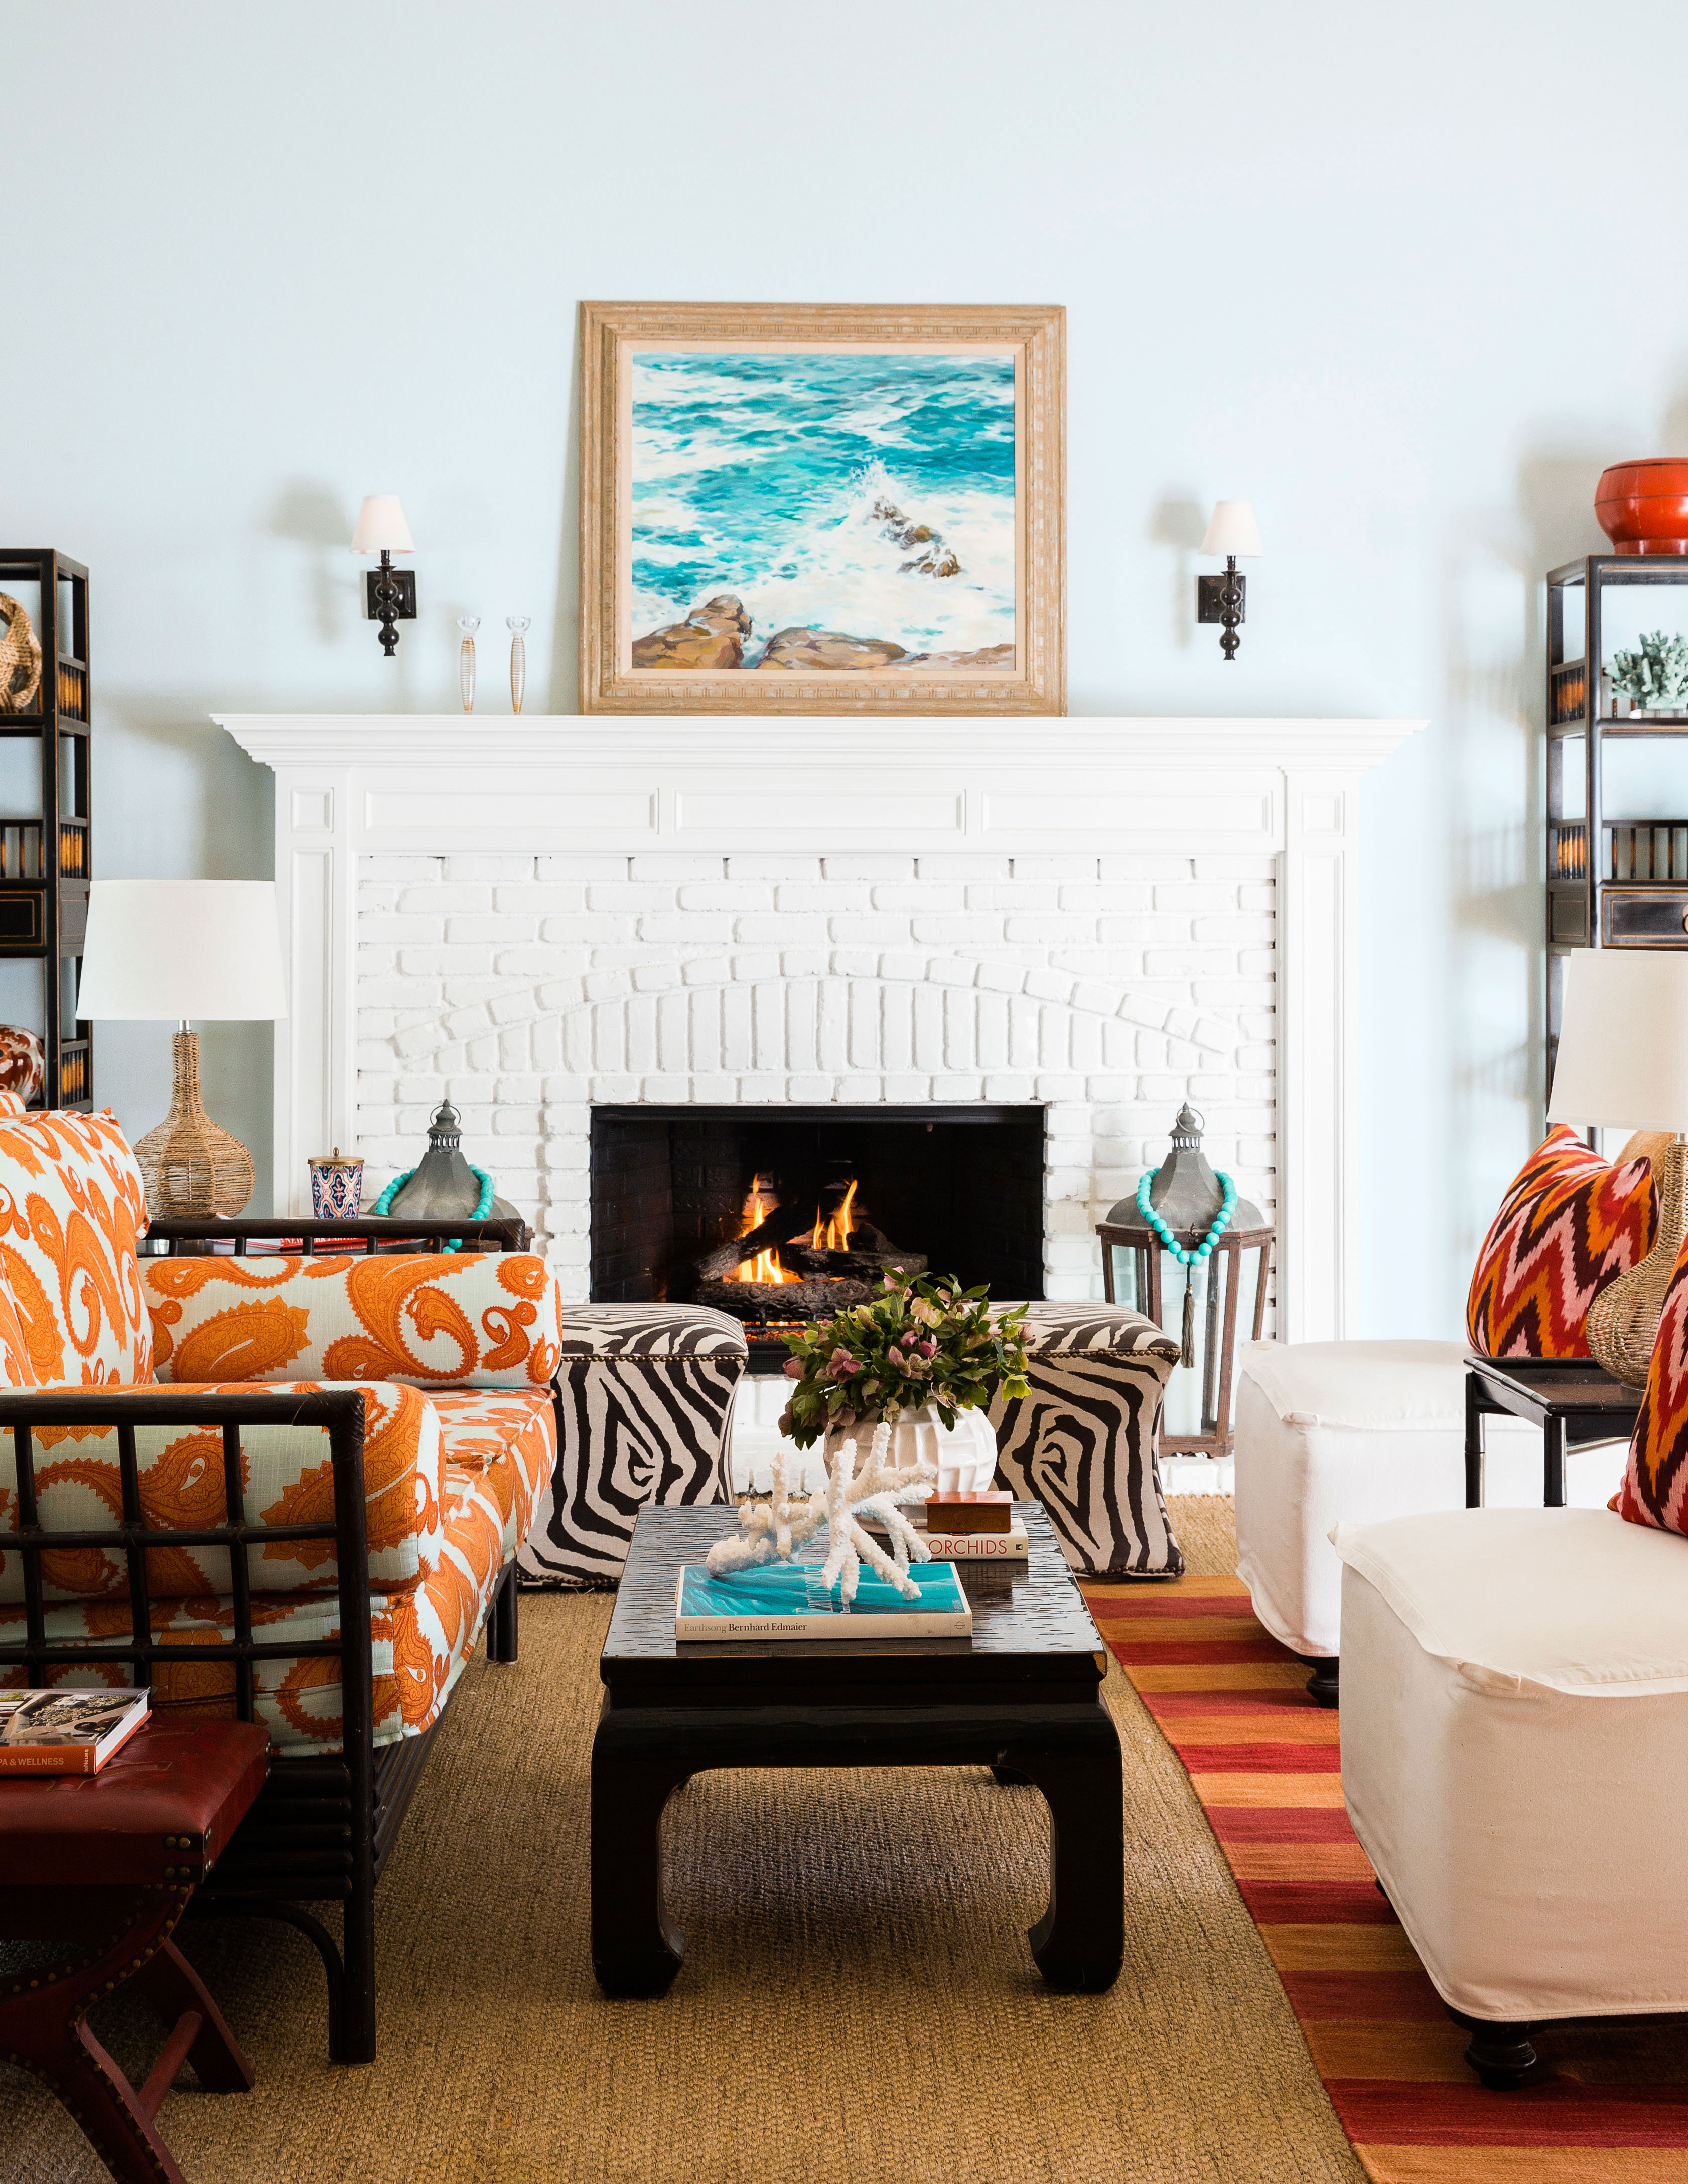 How to Style a Fireplace Mantel